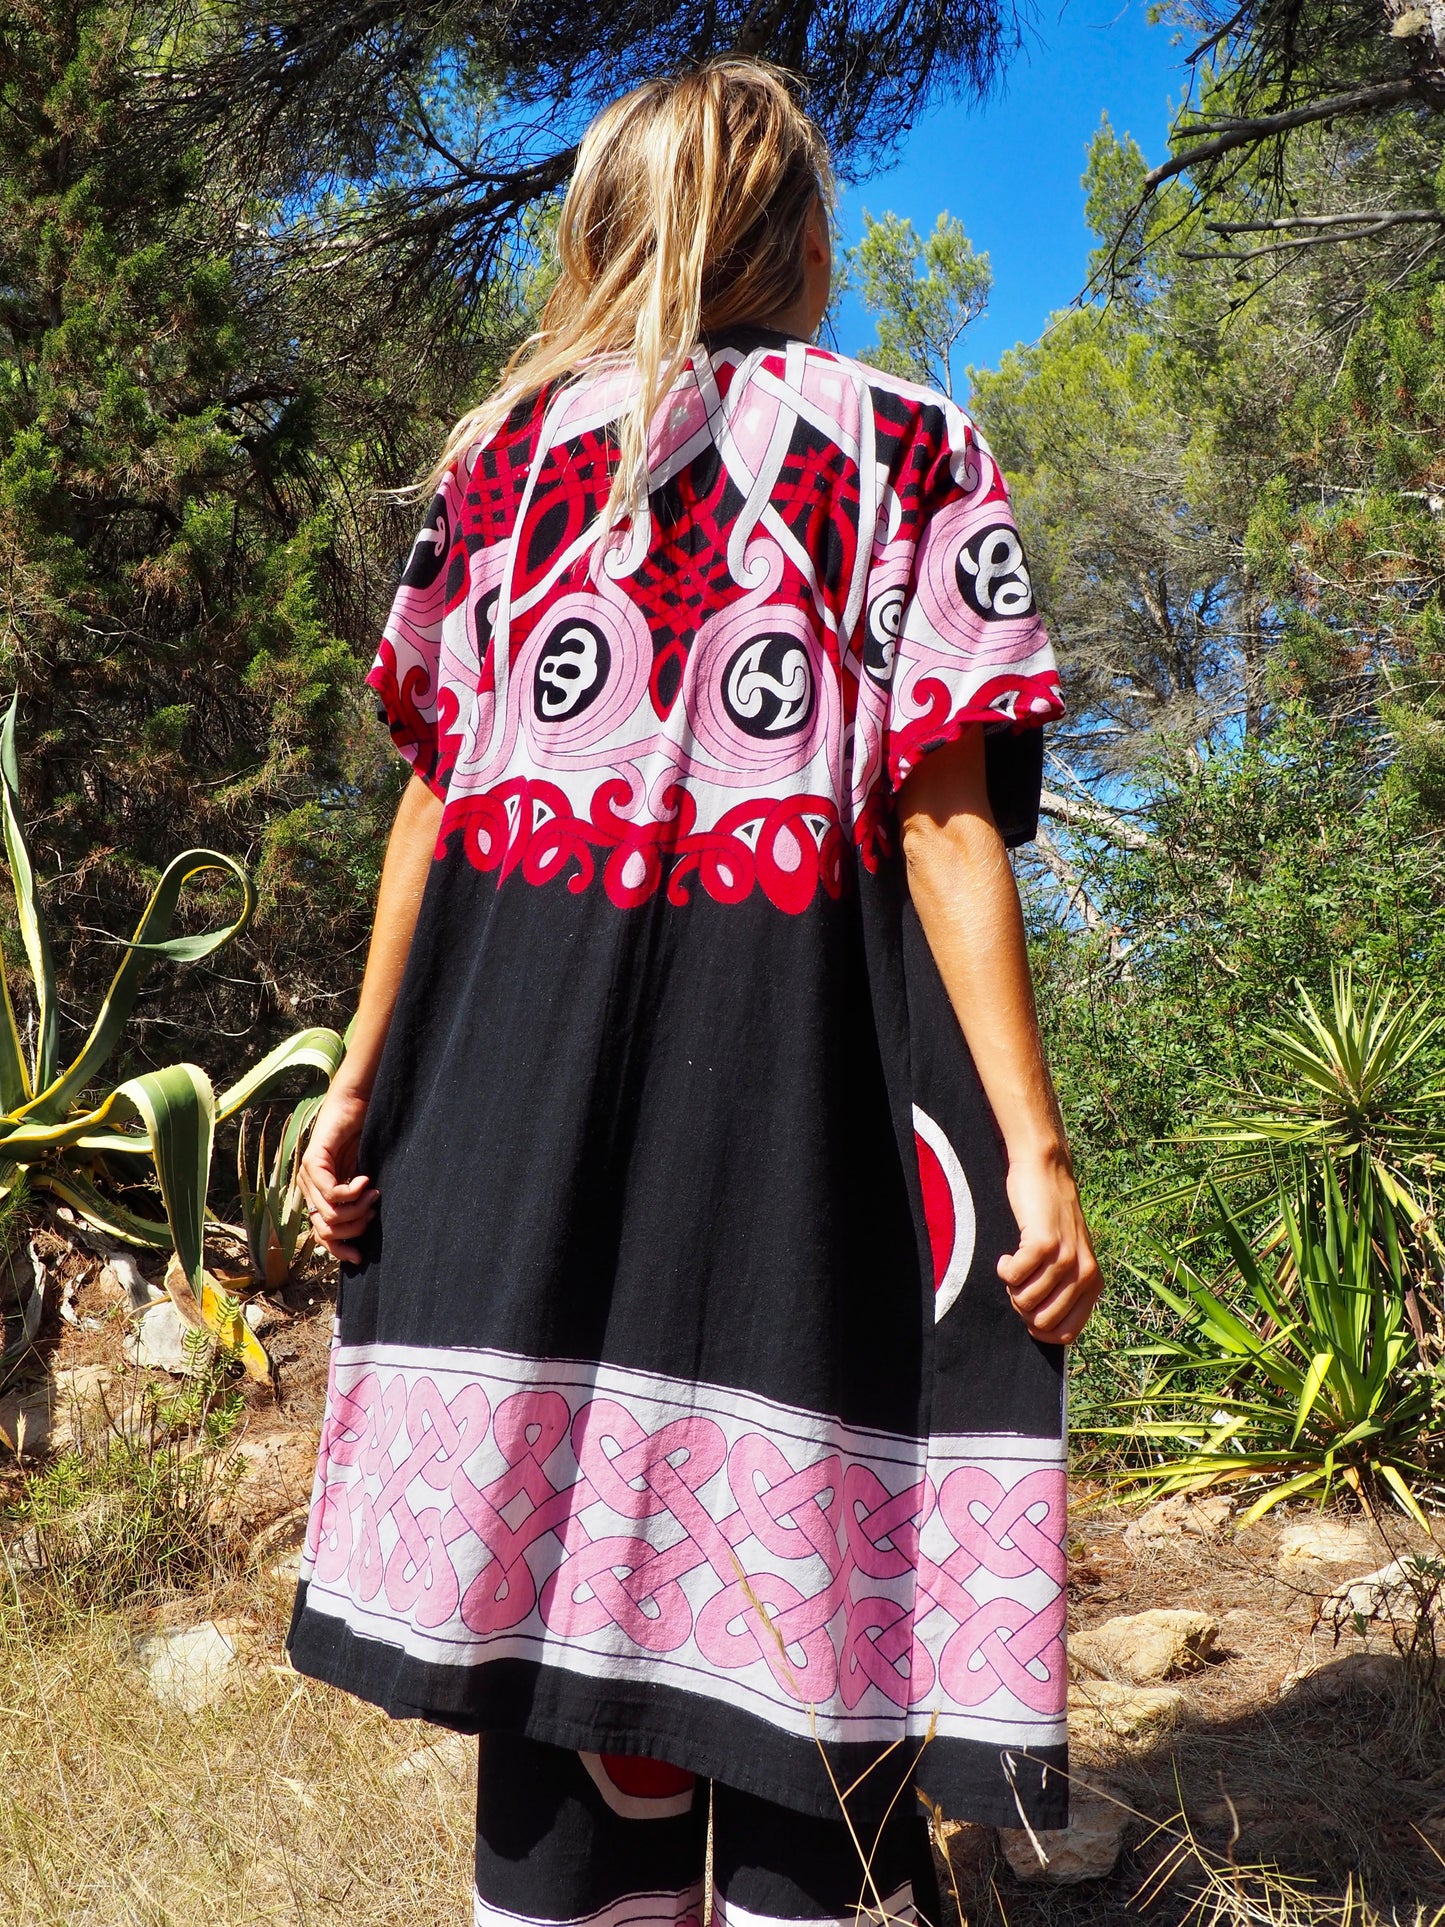 Up-cycled cotton short sleeve kimono jacket in pink and black with vibrant print design and circular motifs by Vagabond Ibiza